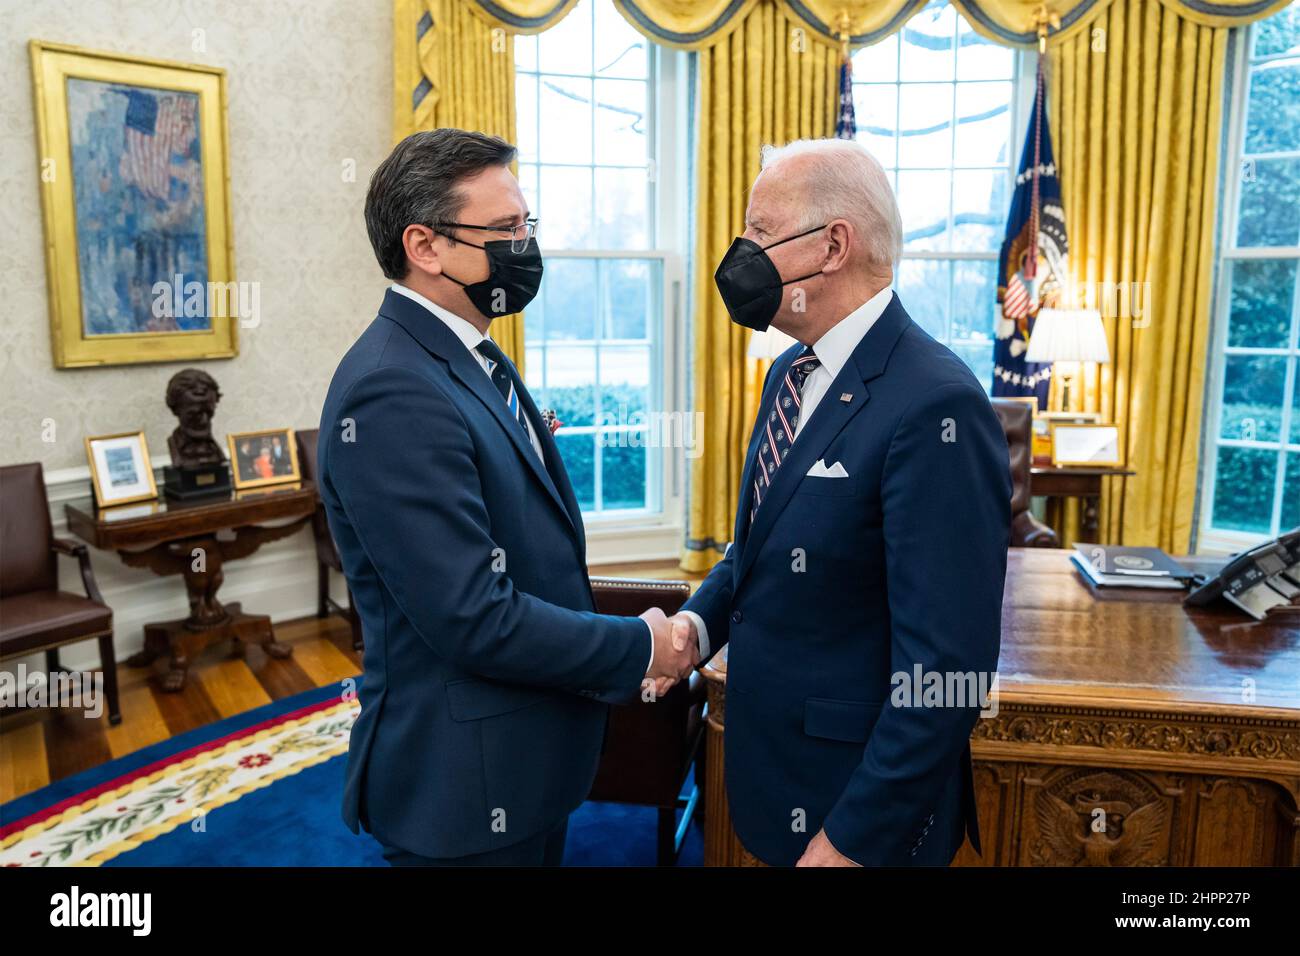 Washington, United States Of America. 22nd Feb, 2022. Washington, United States of America. 22 February, 2022. U.S President Joe Biden greets Ukrainian Foreign Minister Dmytro Kuleba before a bilateral meeting in the Oval Office of the White House, February 22, 2022 in Washington, DC The meeting follows the recognition of separatist regions of Eastern Ukraine by Russian President Vladimir Putin in violation of international law. Credit: Adam Schultz/White House Photo/Alamy Live News Stock Photo